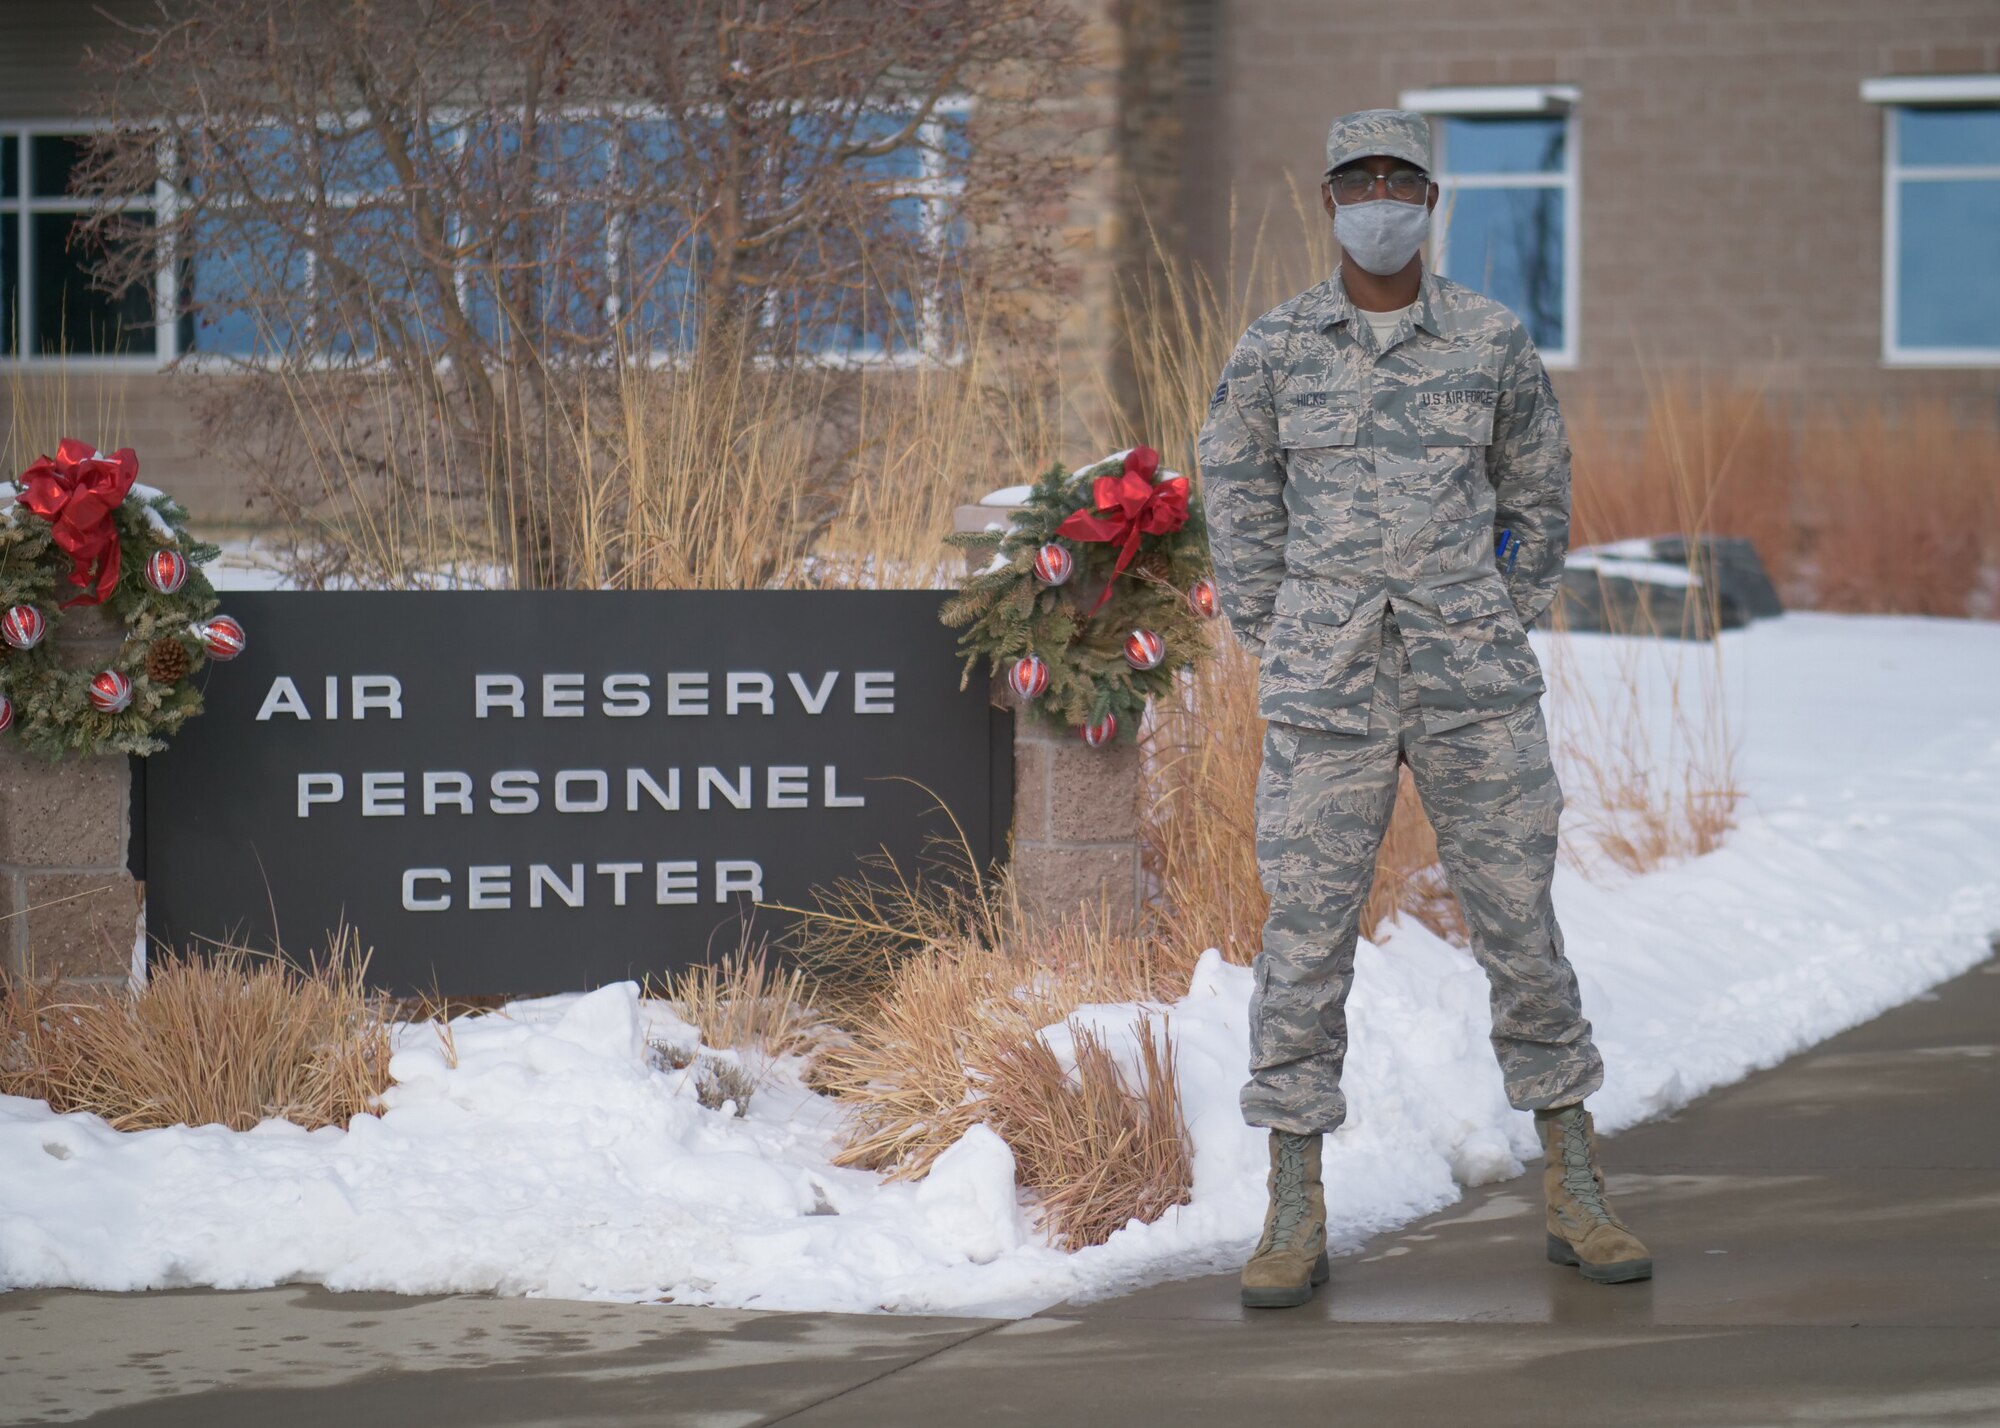 Senior Airman Lamont Hicks, a personnel specialist assigned o Headquarters Air Reserve Personnel Center, poses for a photo outside of the headquarters building Dec. 15, 2020, on Buckley Air Force Base, Colorado.